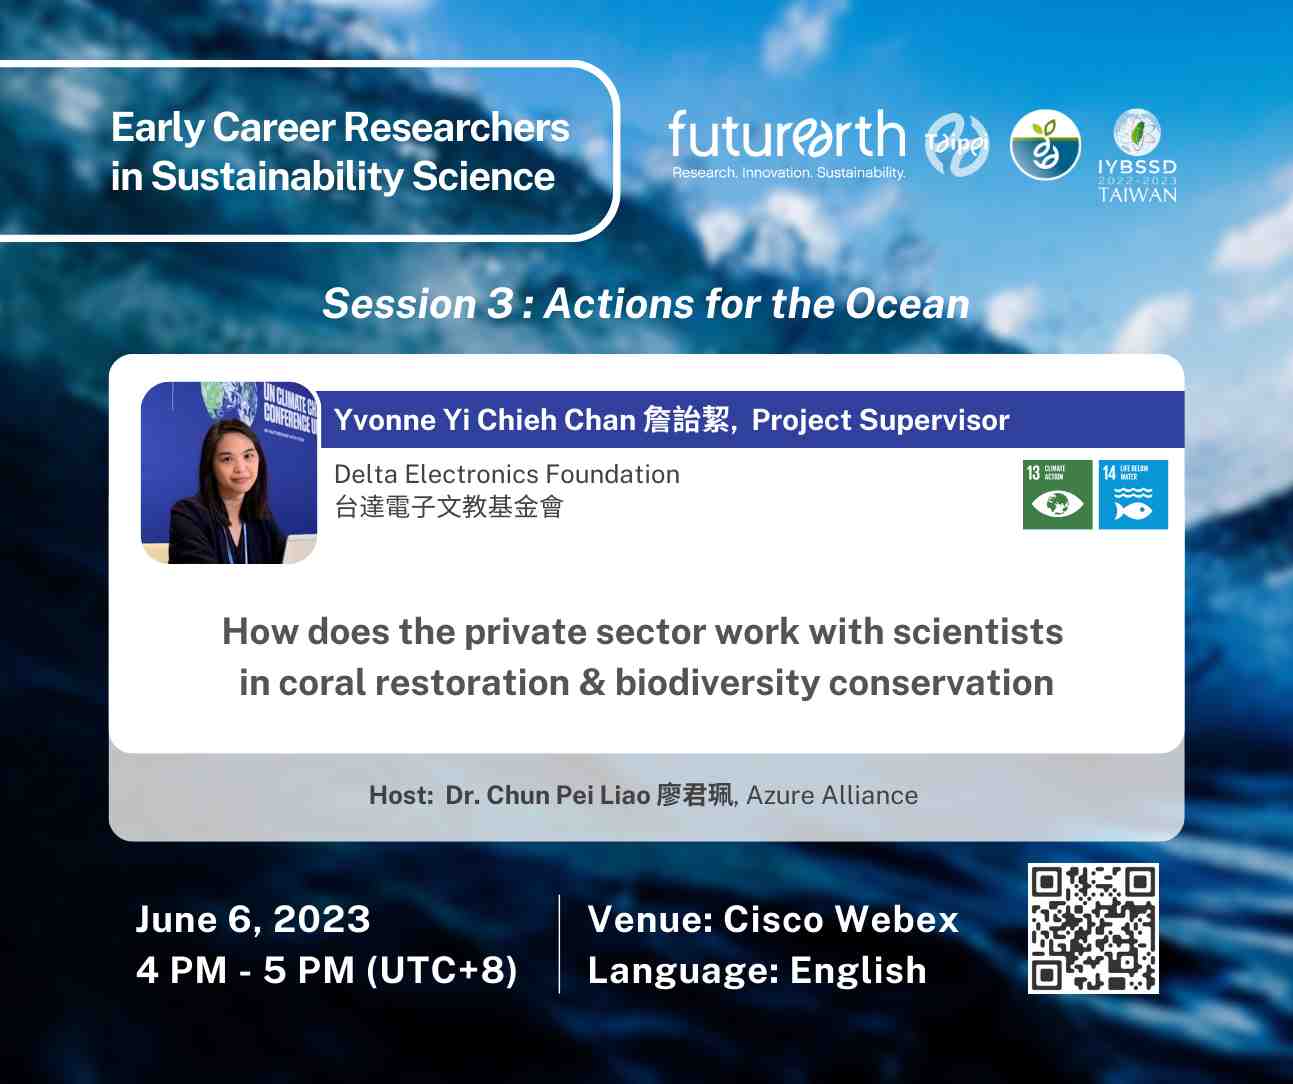 〖???????????????? ???????????????? ???????? ???????????????????????????????????????????????????????? ????????????????????????????┃Actions for the Ocean〗— ❐ S3-4 How does the private sector work with scientists in coral restoration & biodiversity conservati